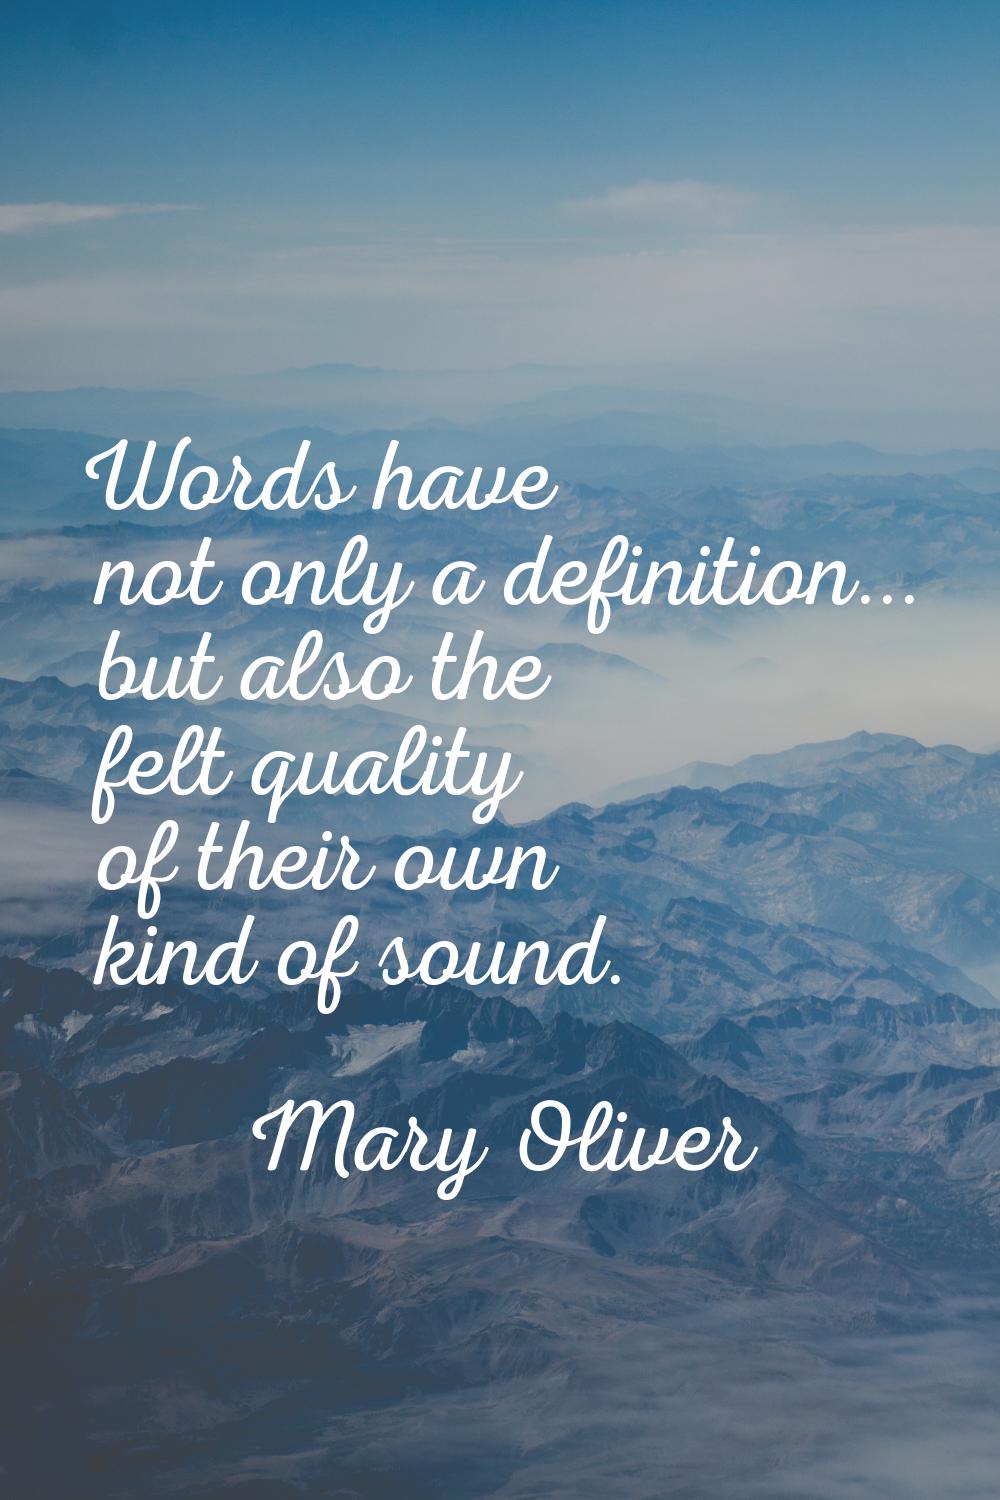 Words have not only a definition... but also the felt quality of their own kind of sound.